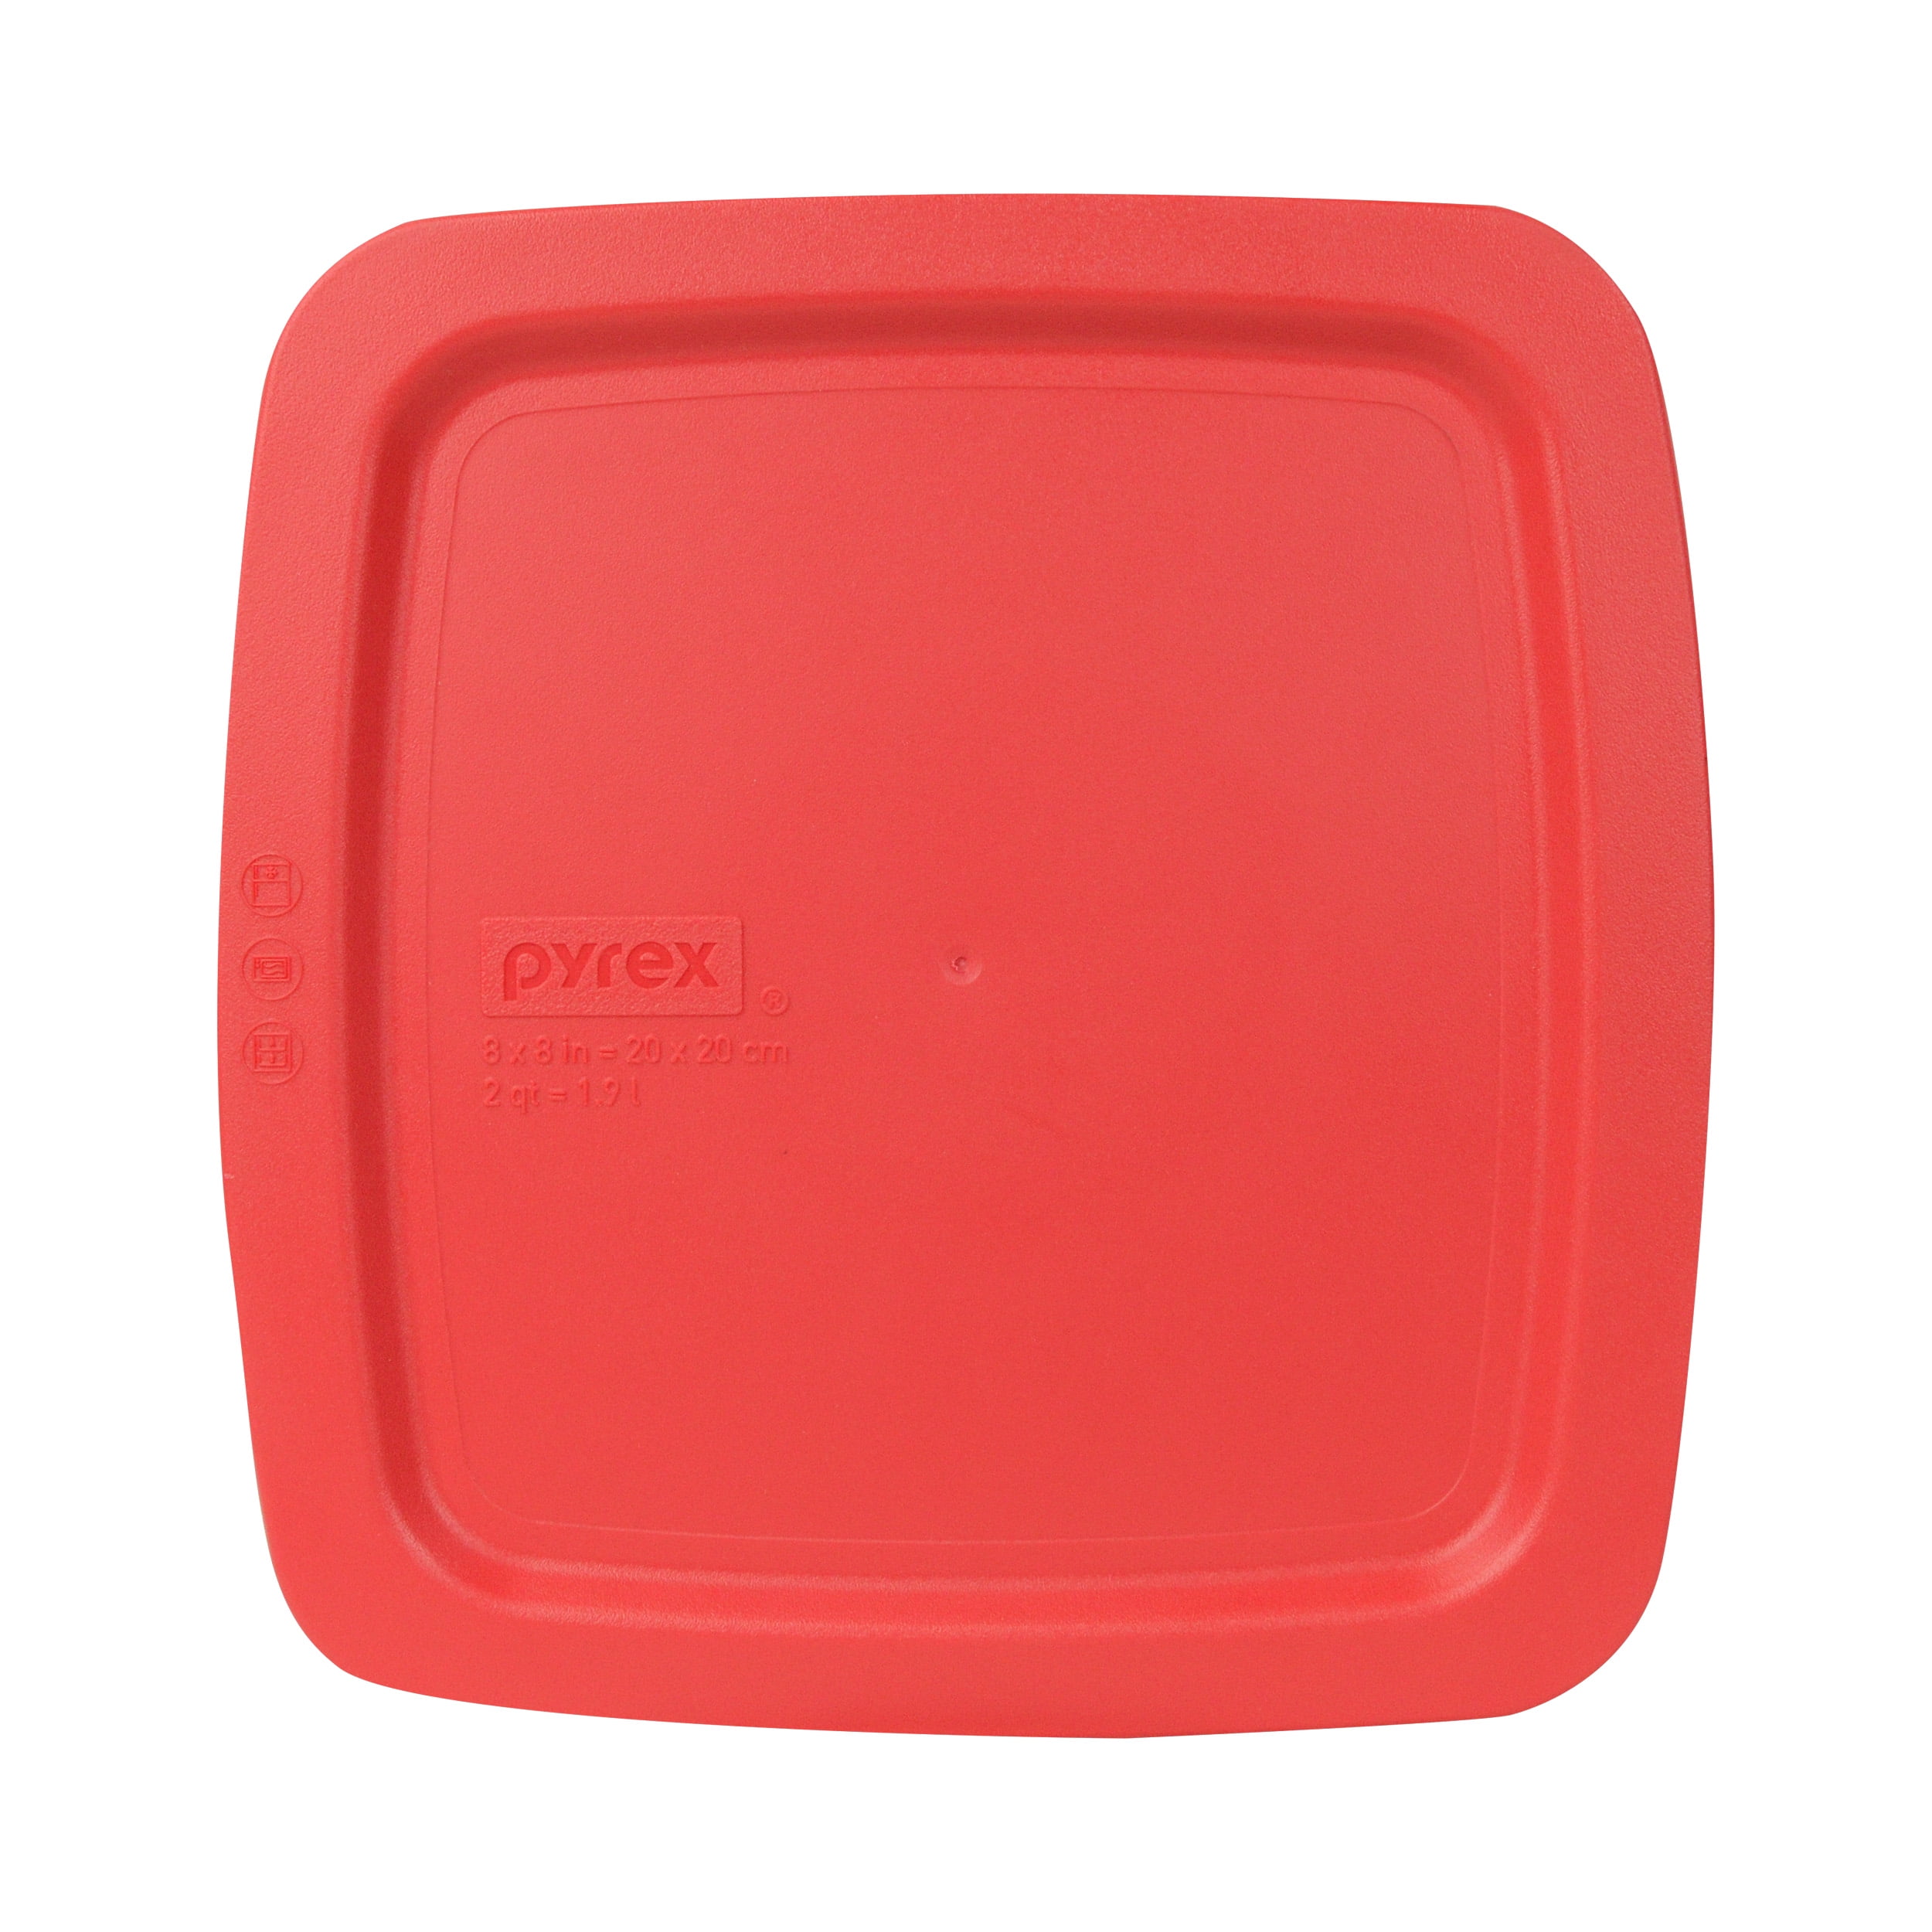 Pyrex C-222-PC 2-Quart Red Plastic Food Replacement Lid Cover (4-Pack) -